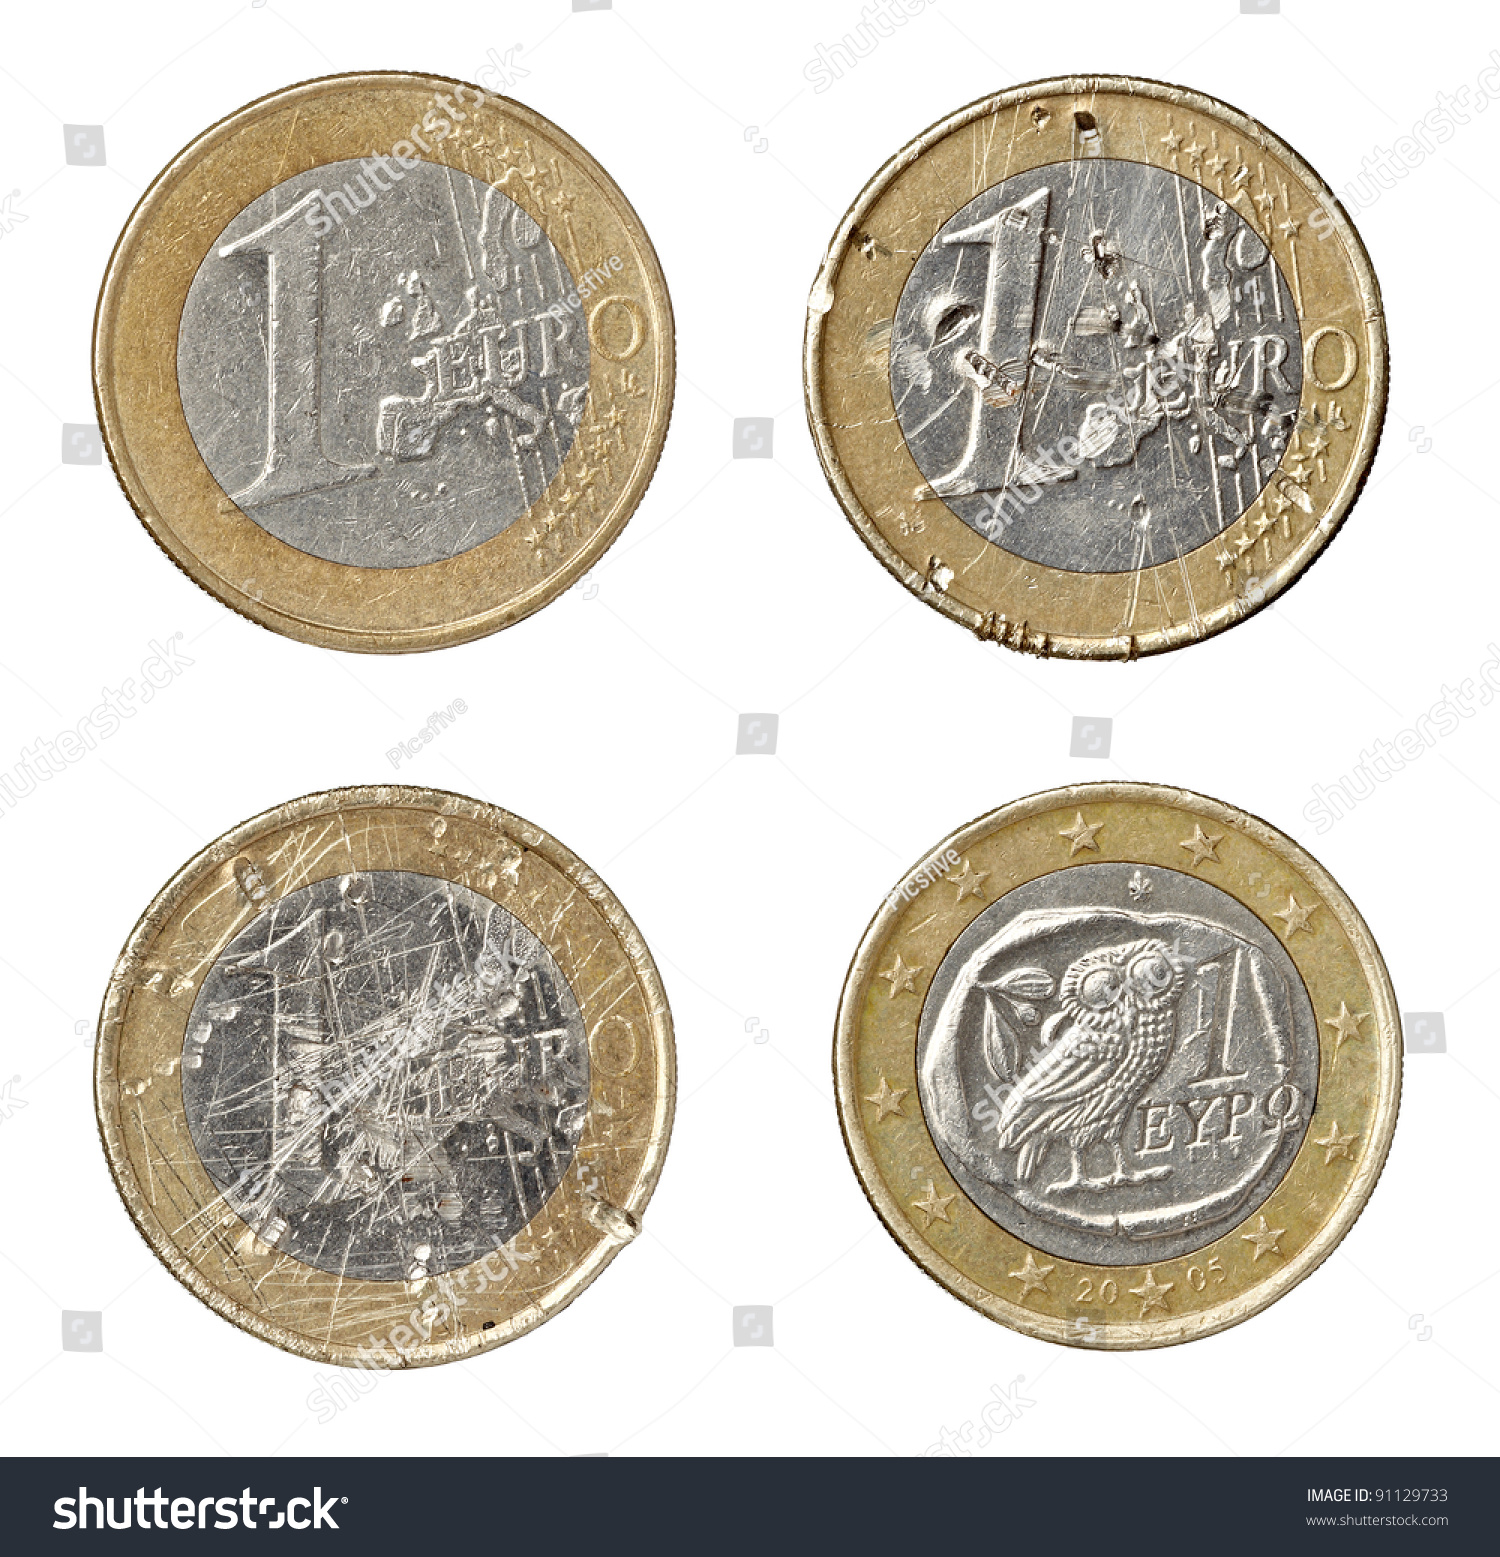 Collection Various Damaged Euro Coins On Stock Photo 91129733 ...